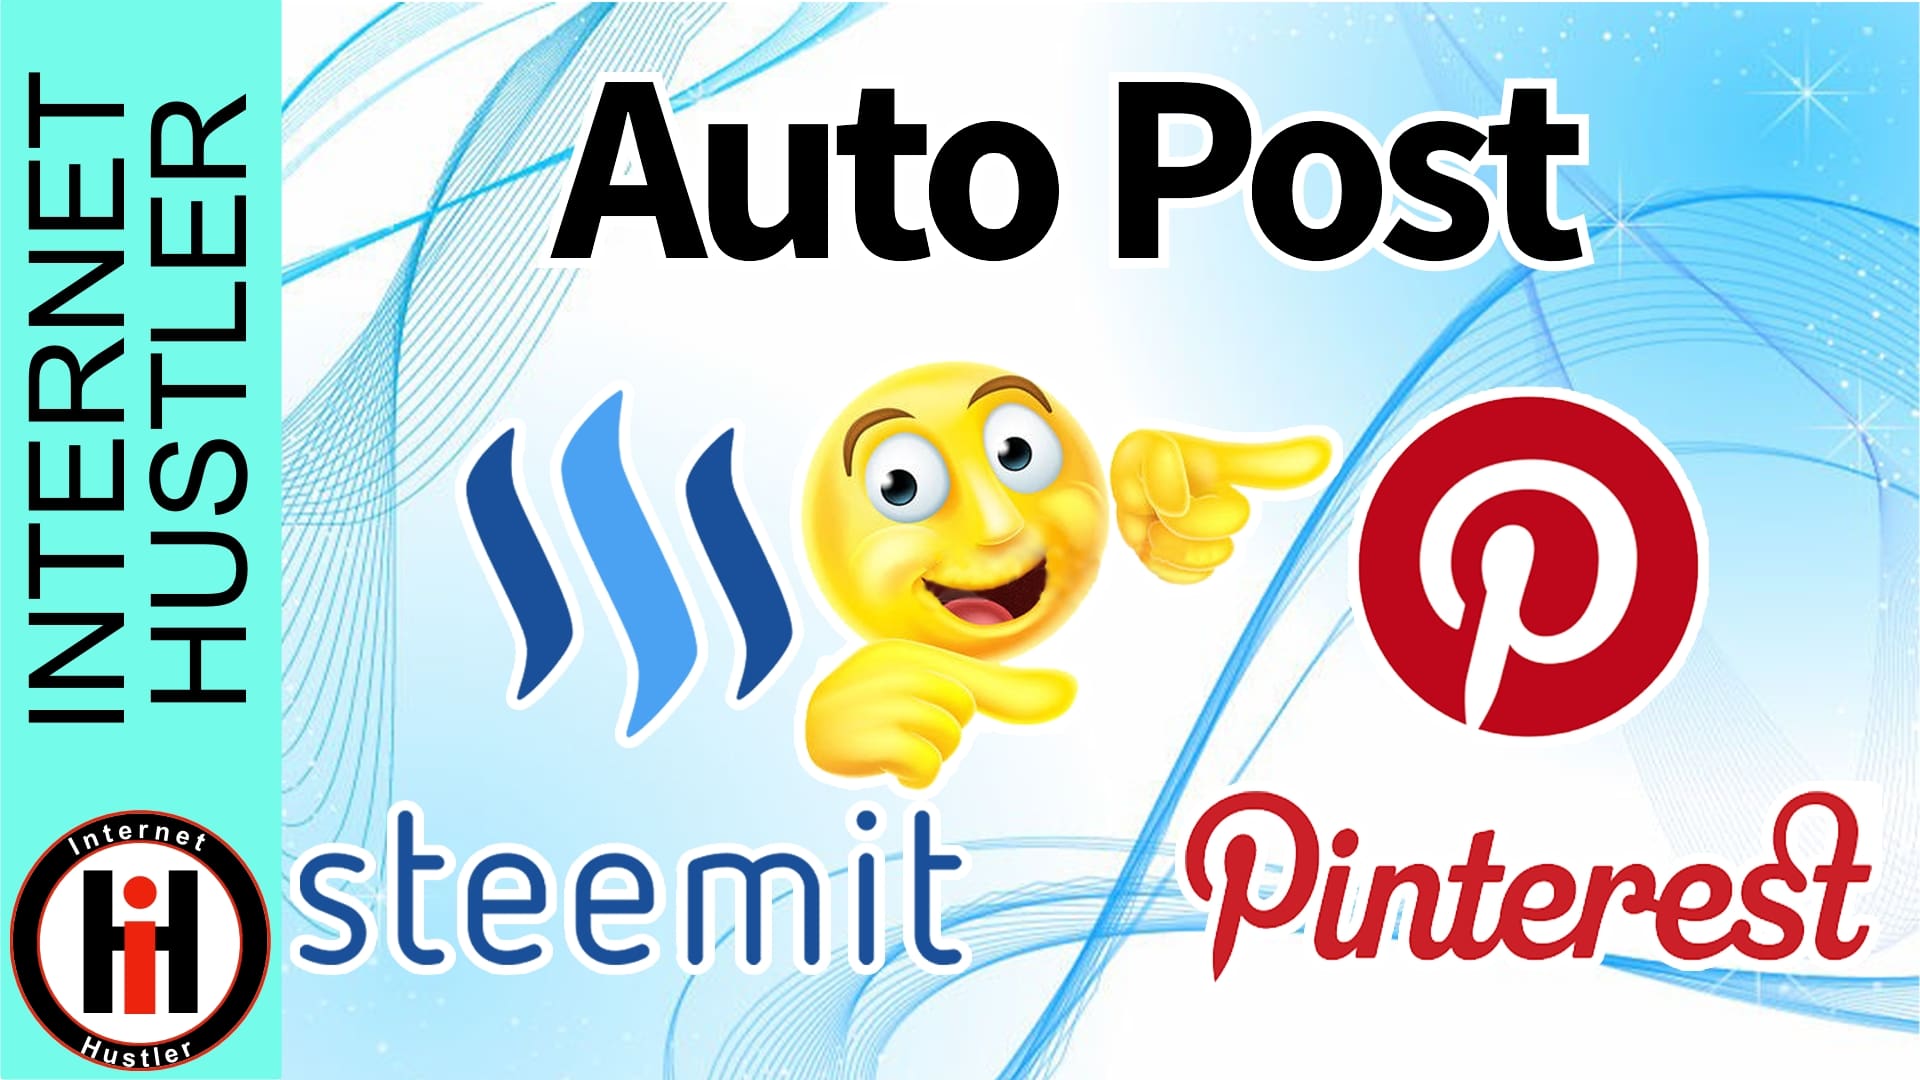 How To Automatically Share Steemit Posts To Pinterest Using IFTTT